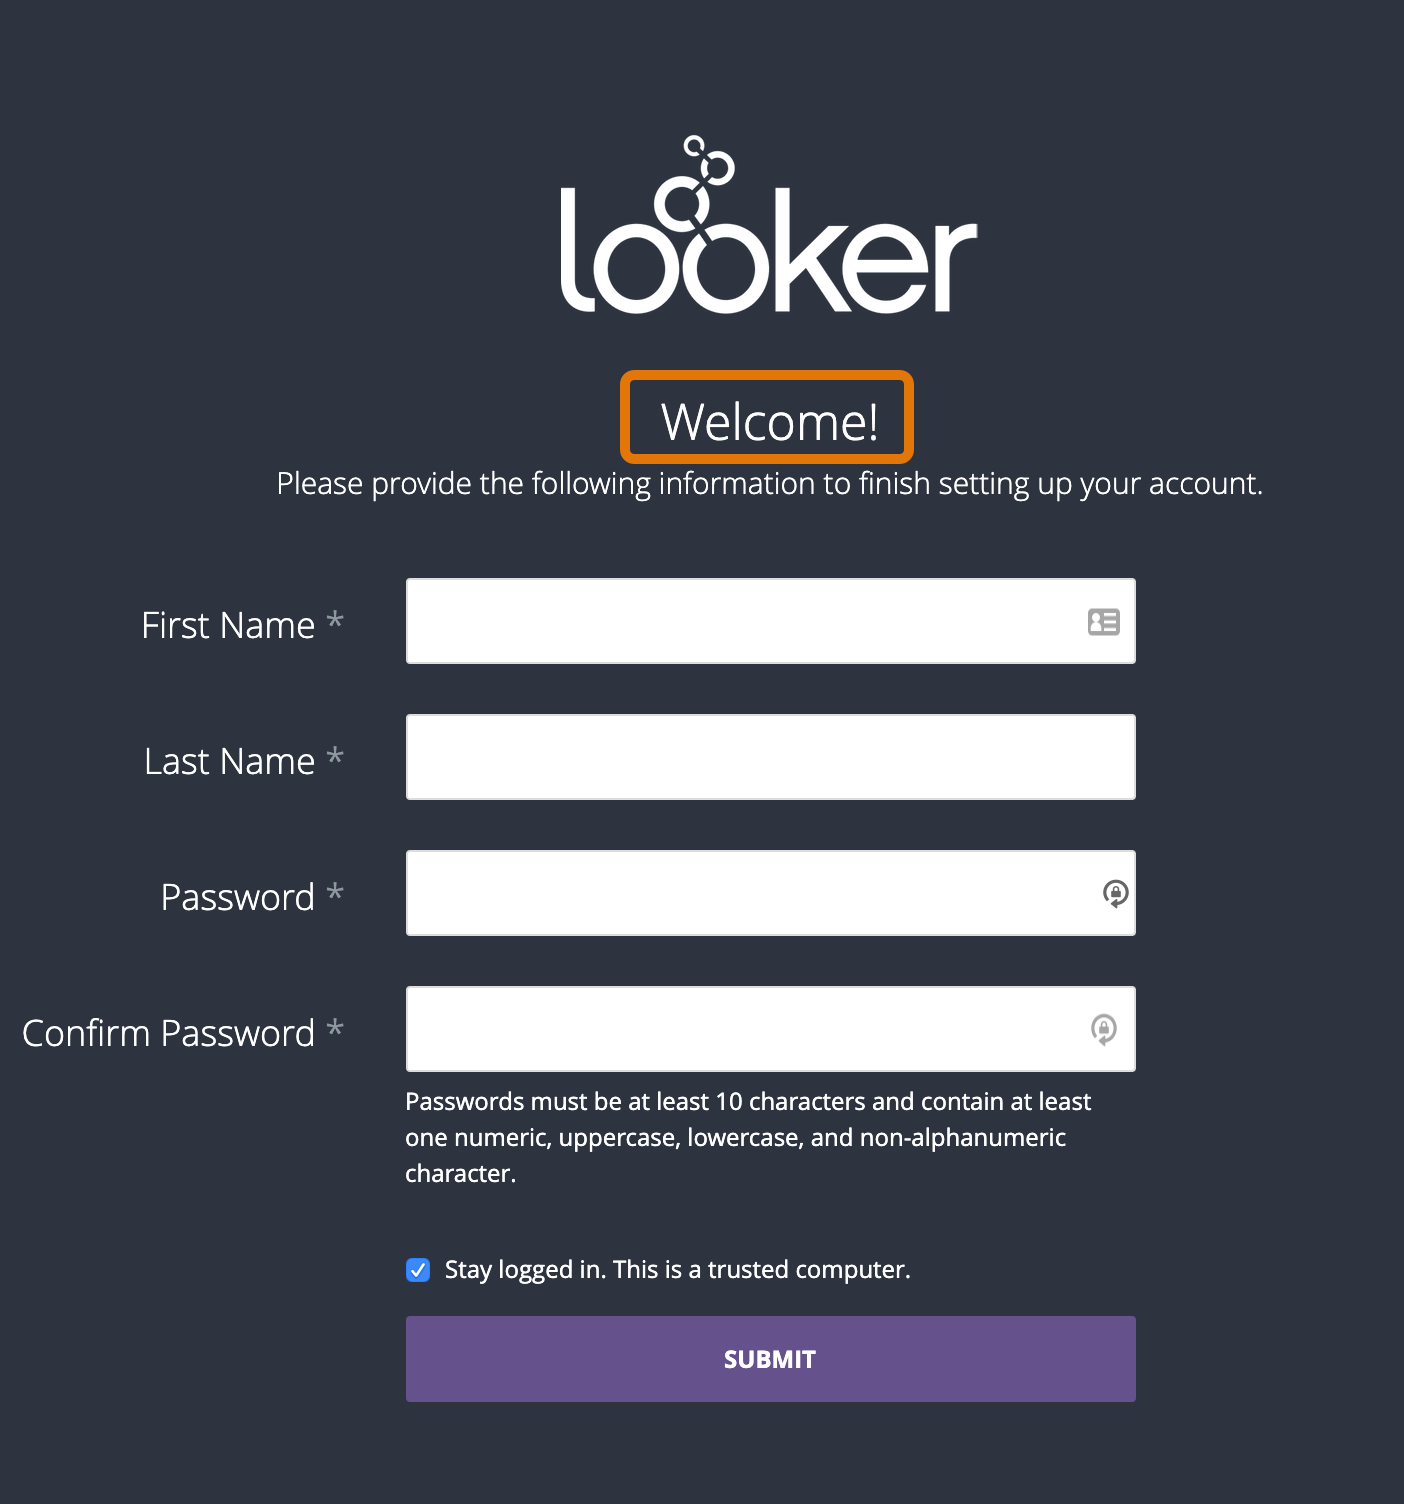 A screenshot of the Looker account setup page. There is a Looker logo at the top of the page, followed by the text Welcome!.